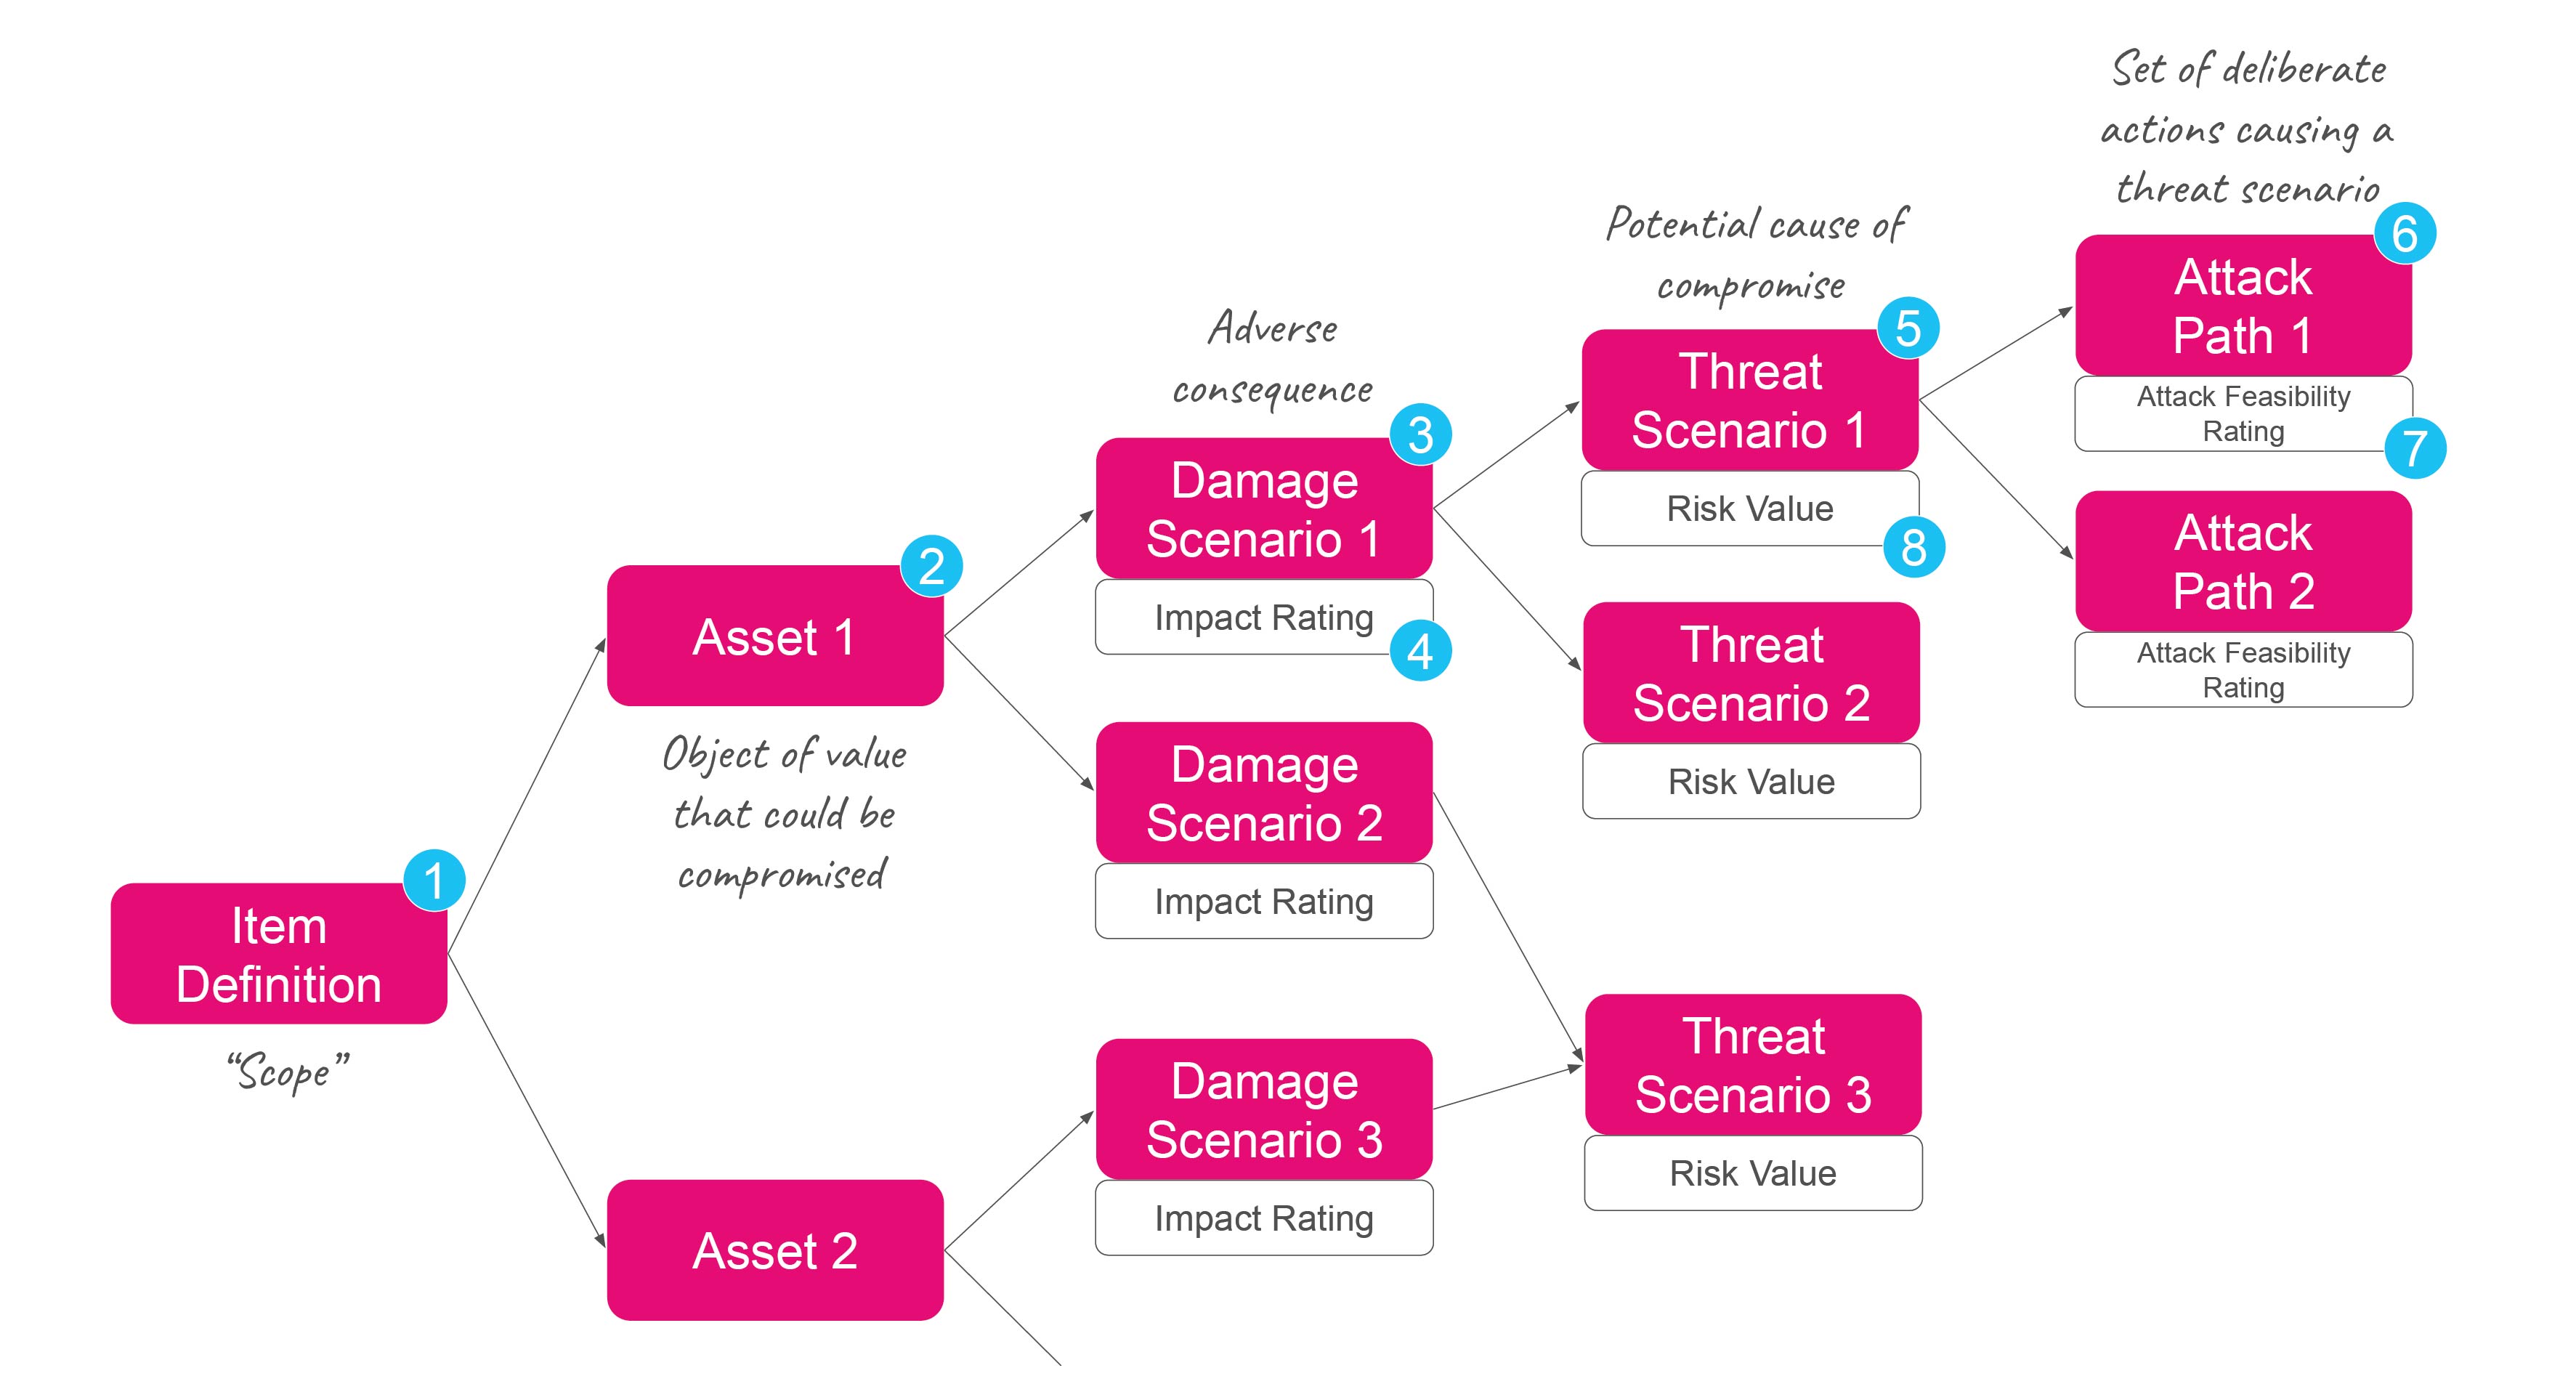 diagram of attack path analysis. Starting from Item definition, then asset that could be compromised, the adverse consequence and impact rating of said damage, potential cause of compromise and risk value, and finally the attack path aka set of deliberate actions causing a threat scenario